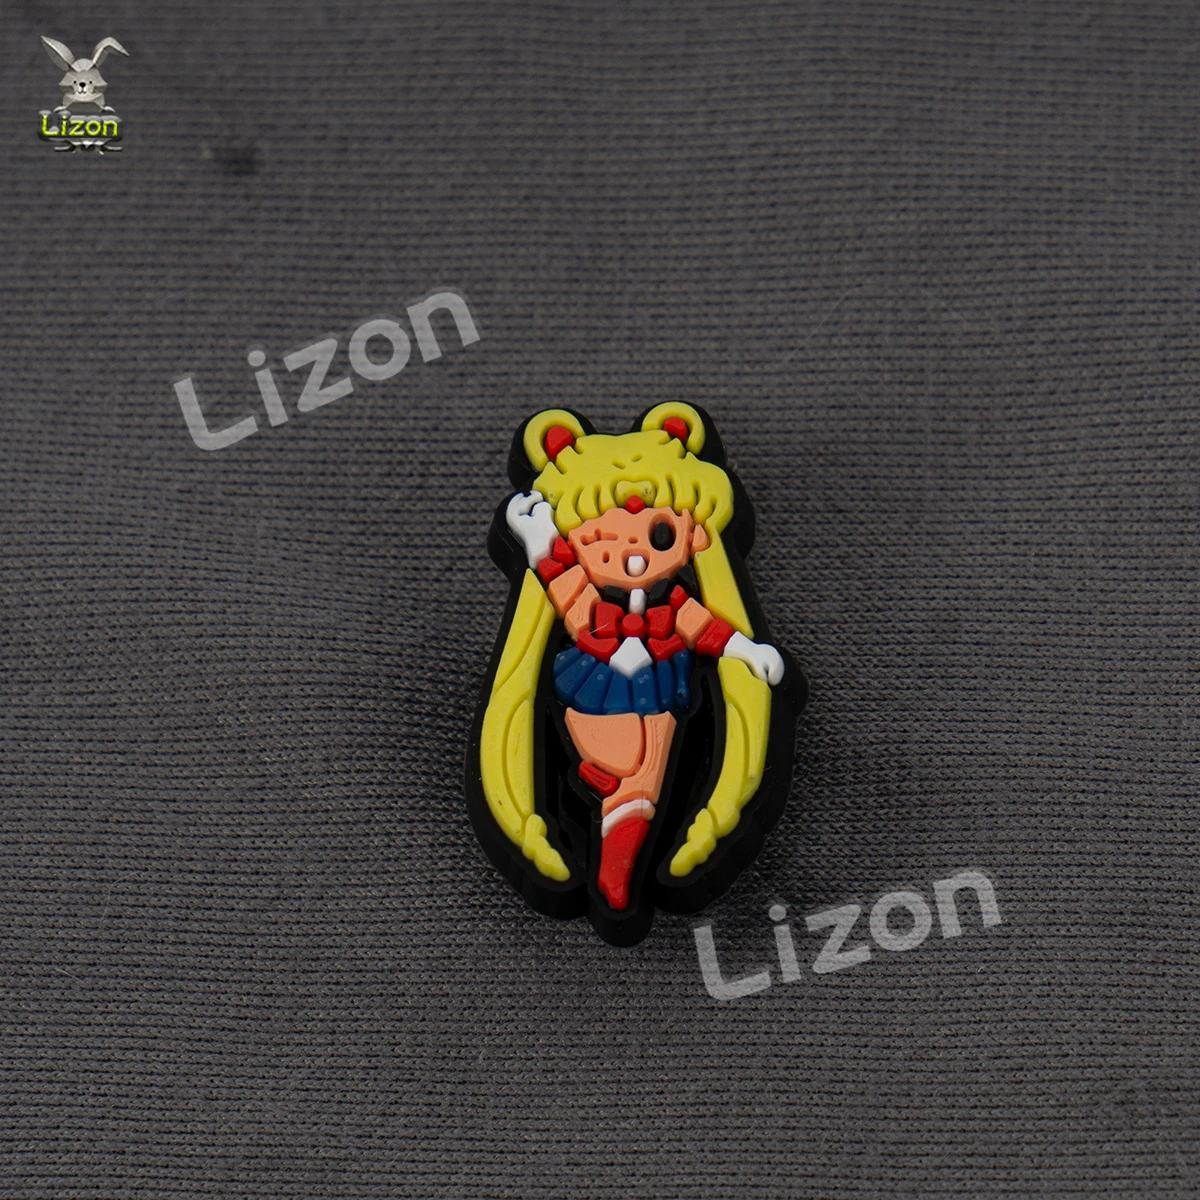 cute halloween costumes Anime Cartoon Sailor Moon Shoe Charms Shoelace Backapck Fit Wristbands Decorate Shoe Buckle Croc Jibz Cosplay Accessories yandy costumes Cosplay Costumes